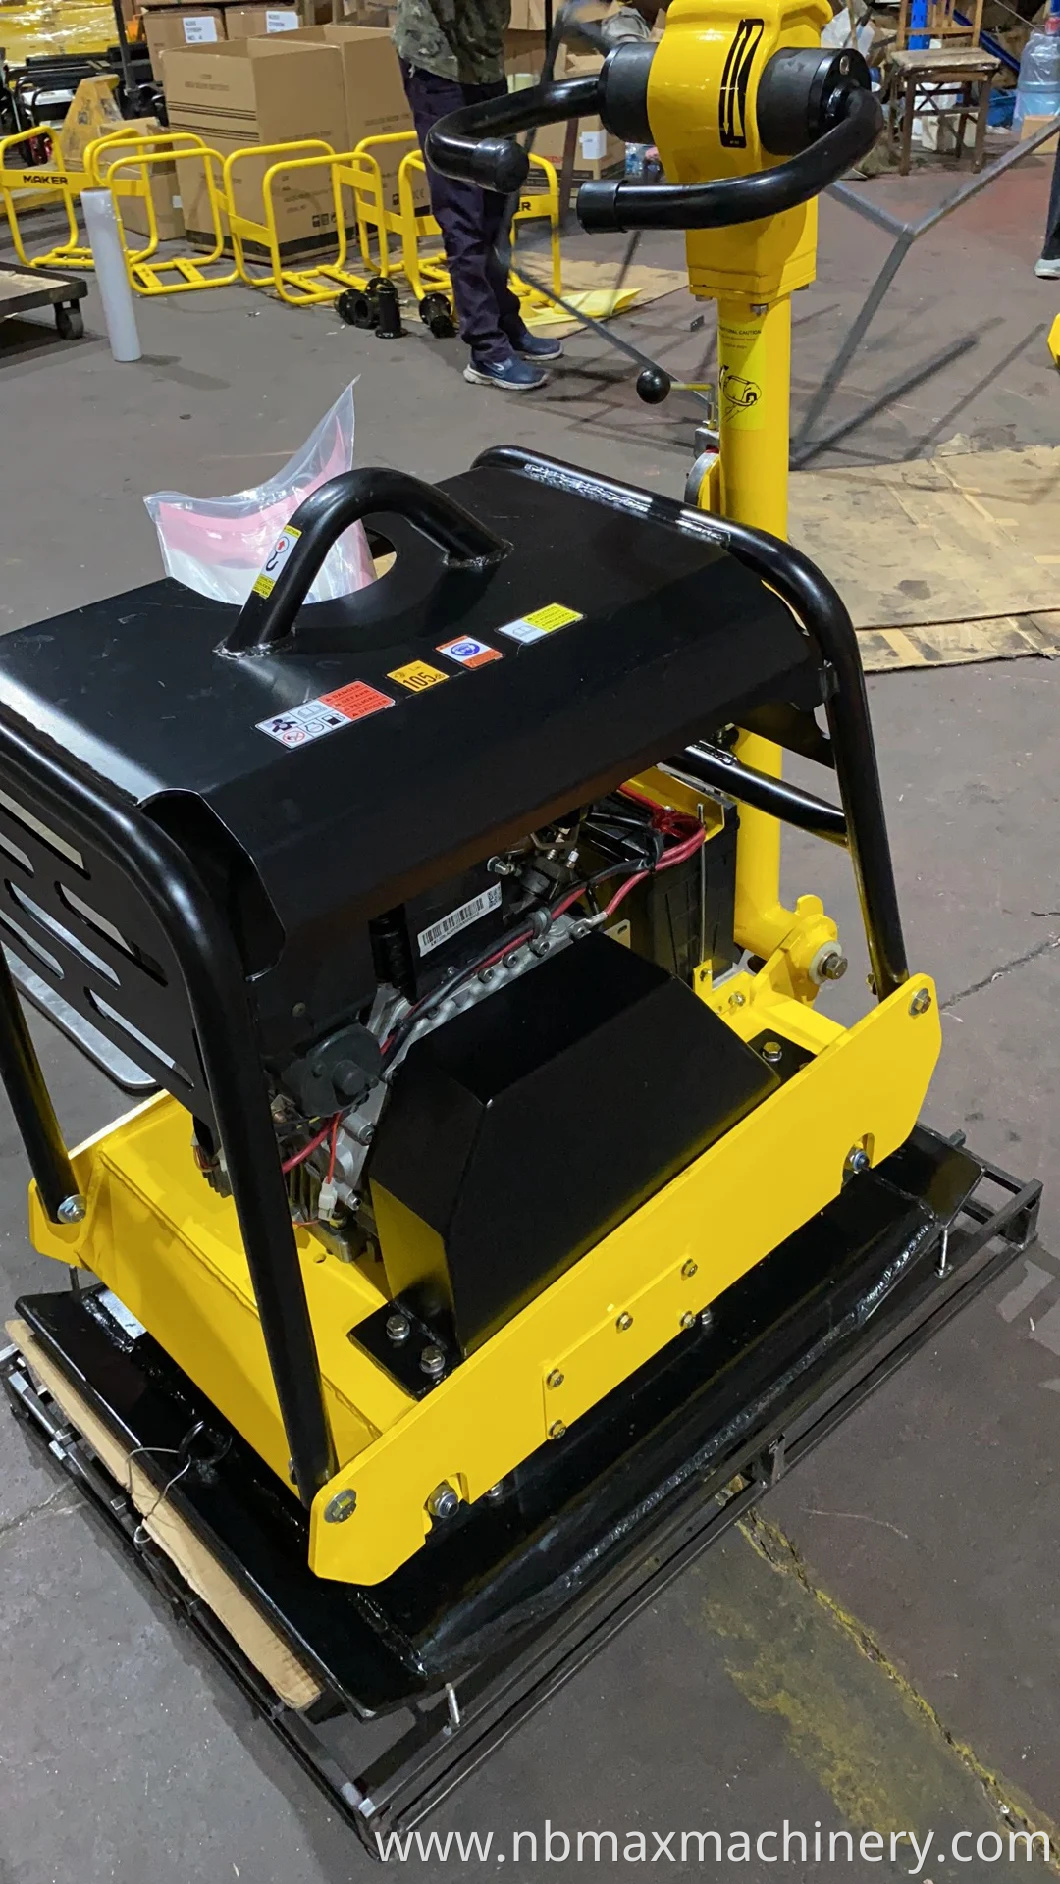 Hand Held Plate Compactor Vibrating Plate Compactor for Sale Wacker Plate Compactor